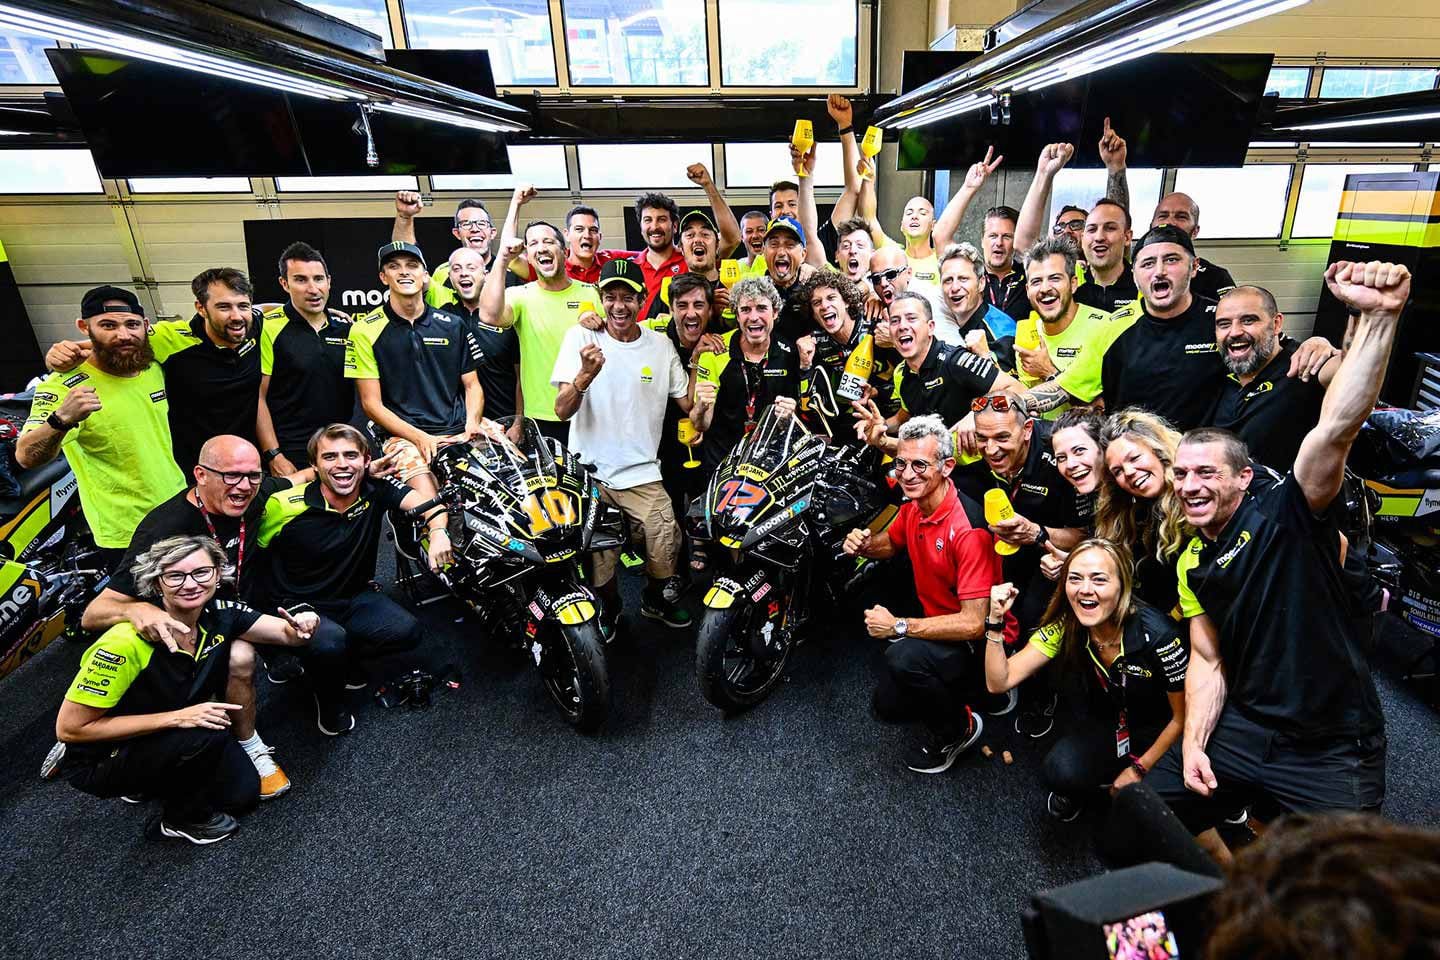 There’s plenty of heart and brains in the Mooney VR46 Racing Team garage.